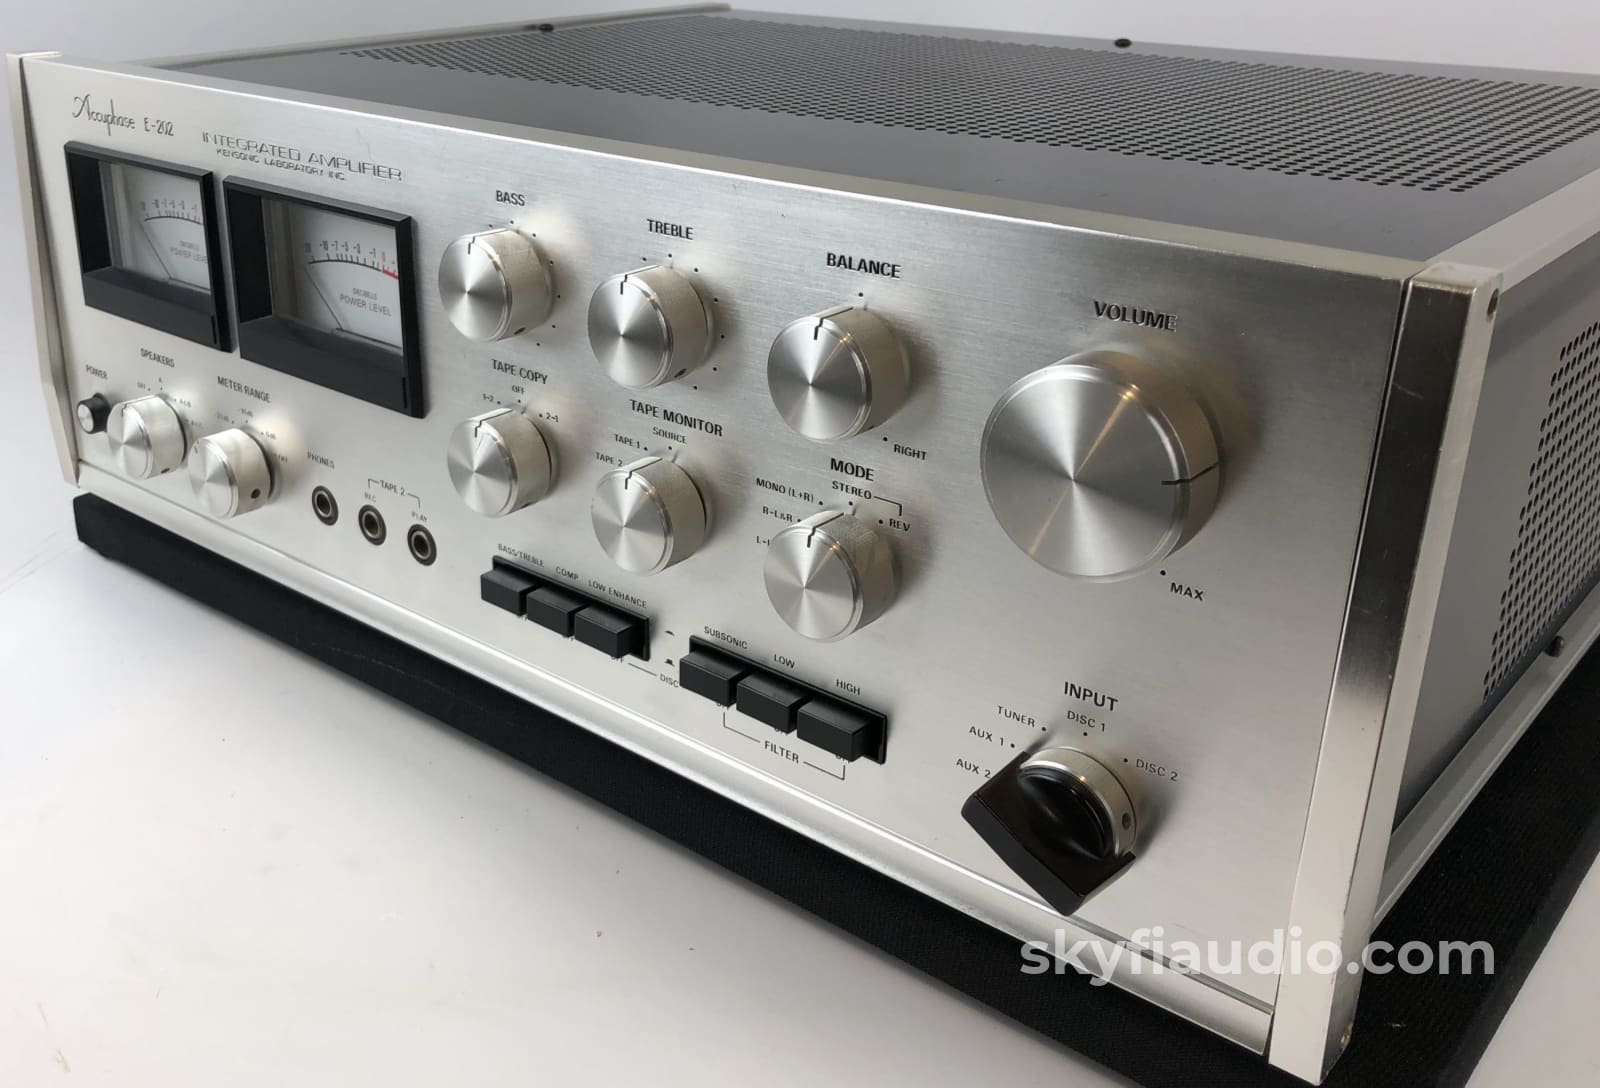 Accuphase E-202 Integrated Amplifier With Meters - Wow!